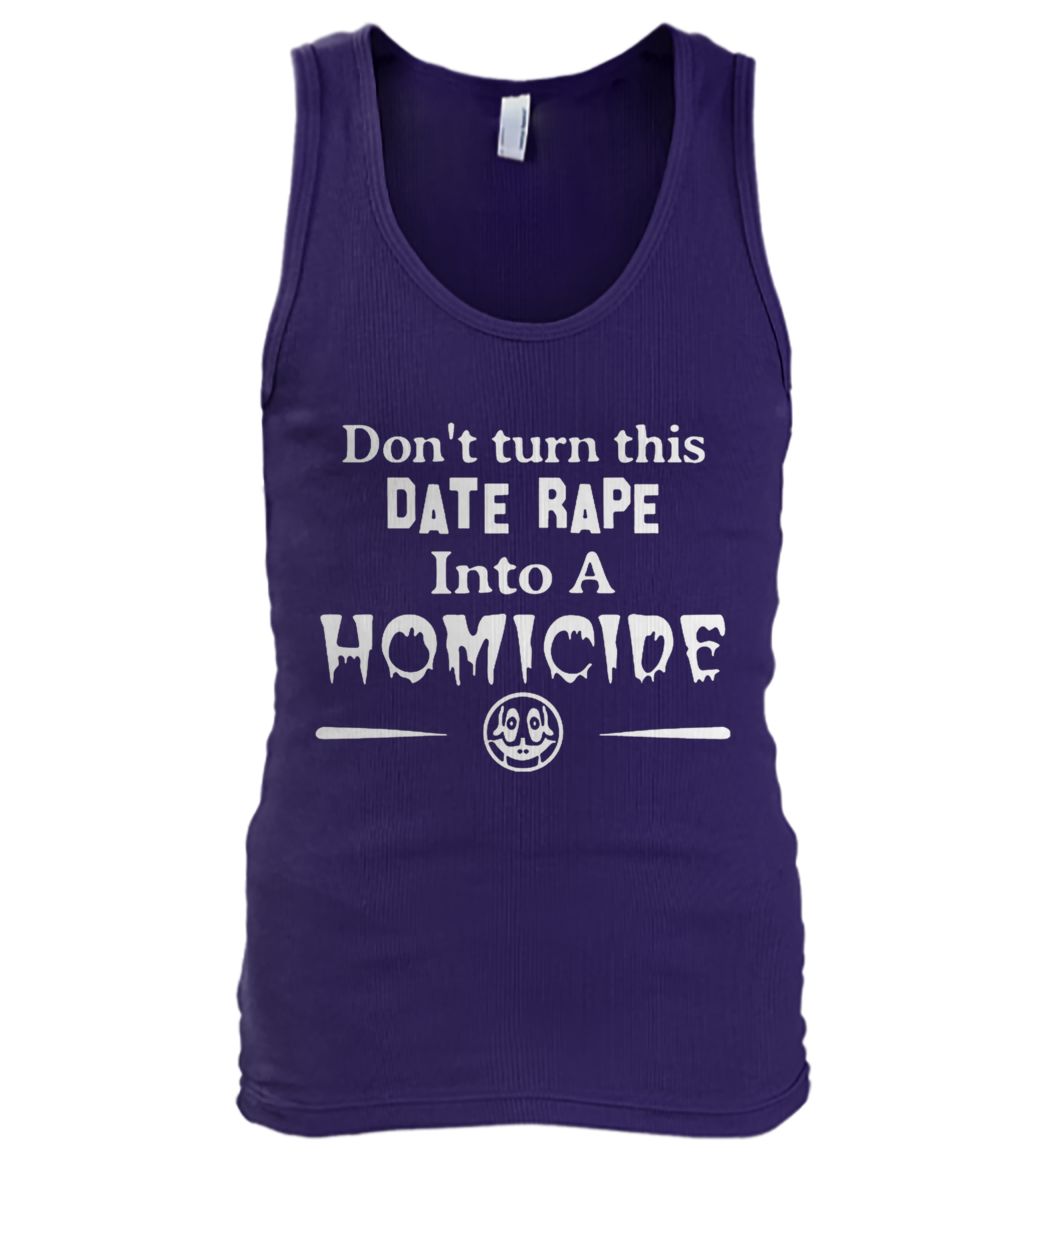 Don't turn this date rape into a homicide men's tank top